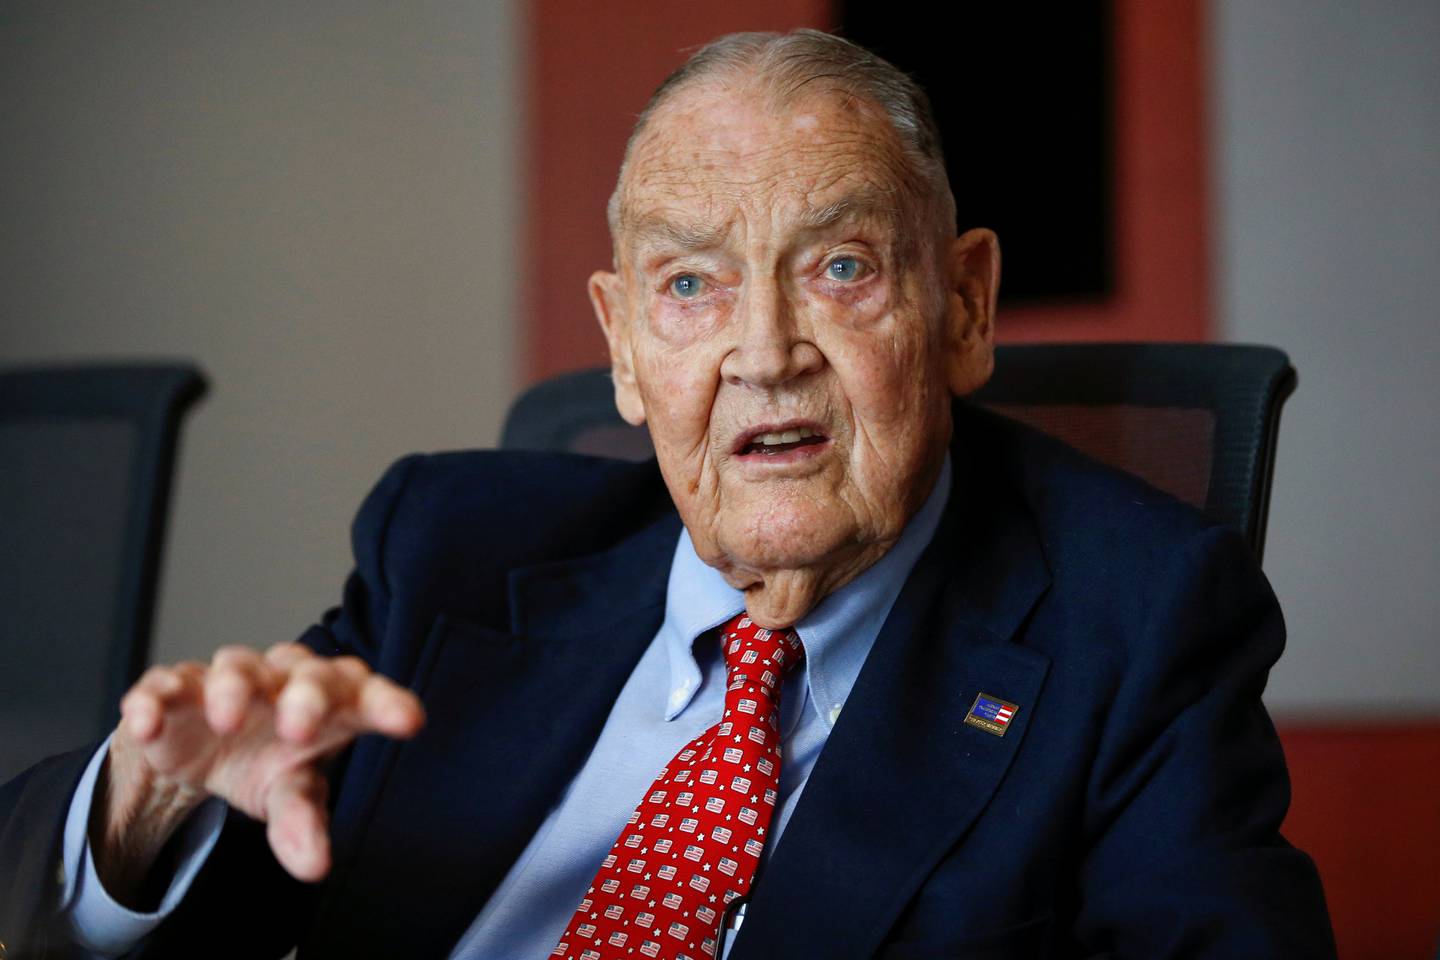 FILE PHOTO: Jack Bogle, founder and retired CEO of The Vanguard Group, speaks during the Global Wealth Management Summit in New York, U.S., June 17, 2014. REUTERS/Shannon Stapleton/File Photo